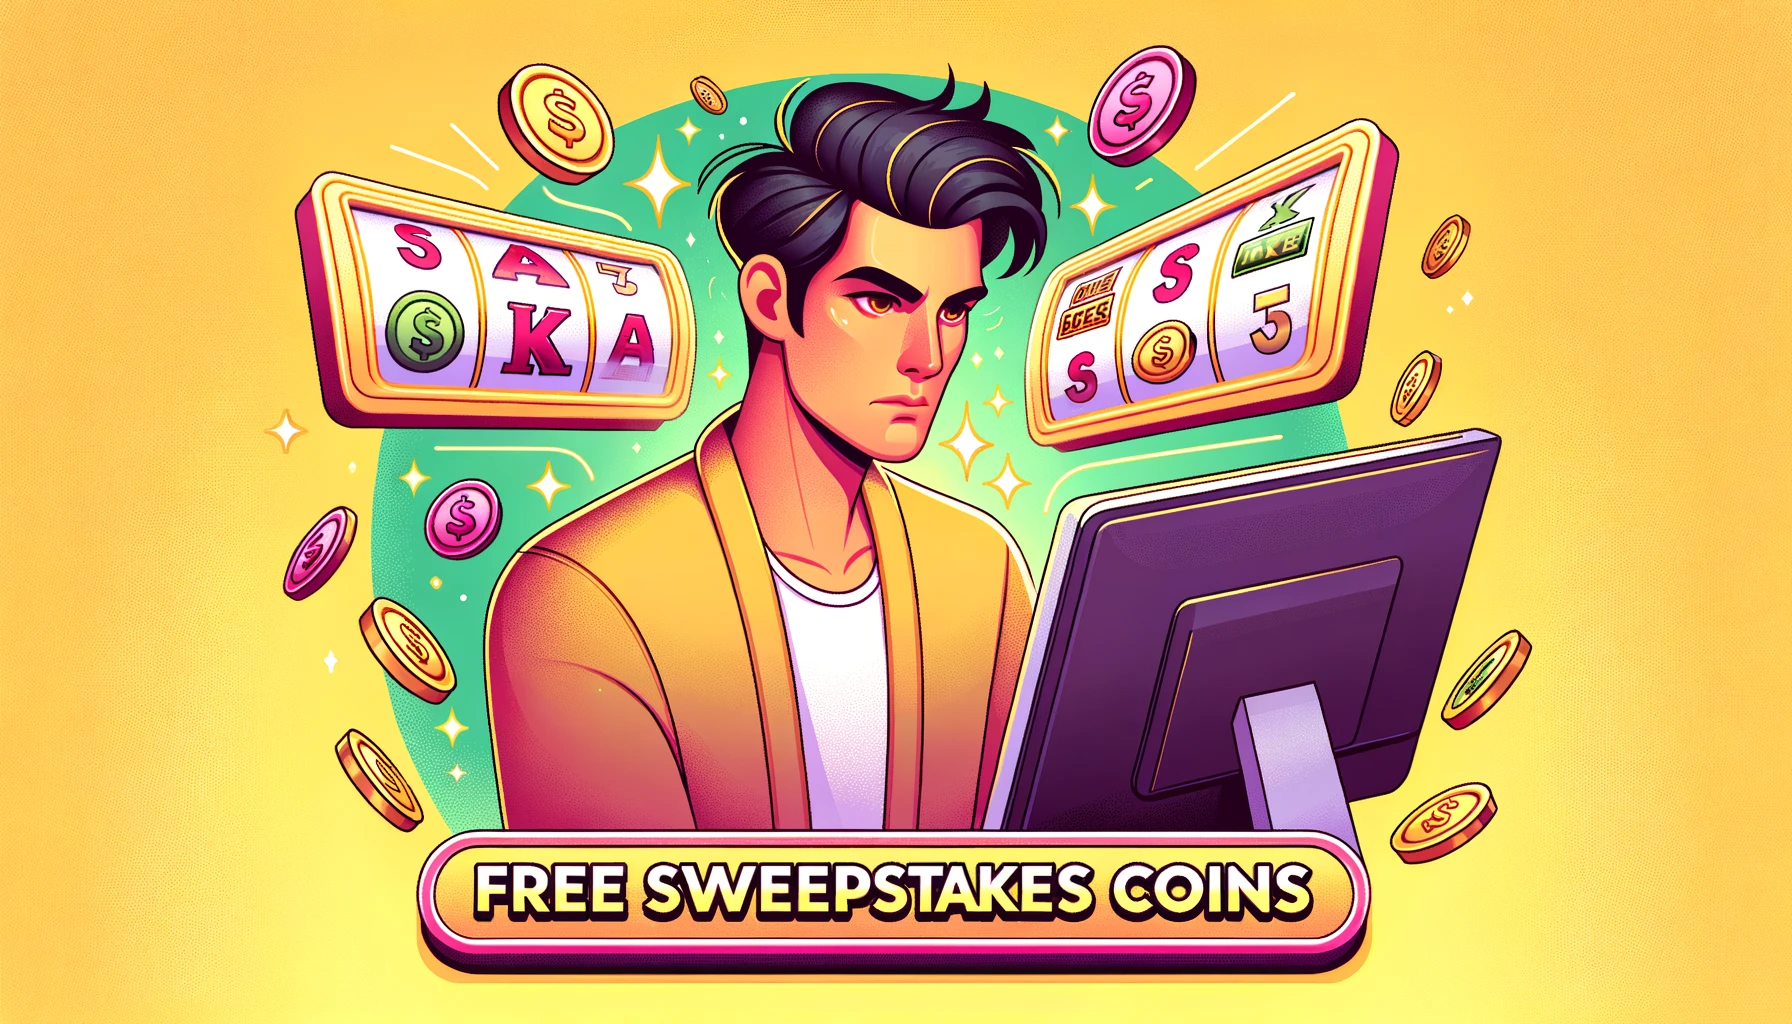 Free sweepstakes coins